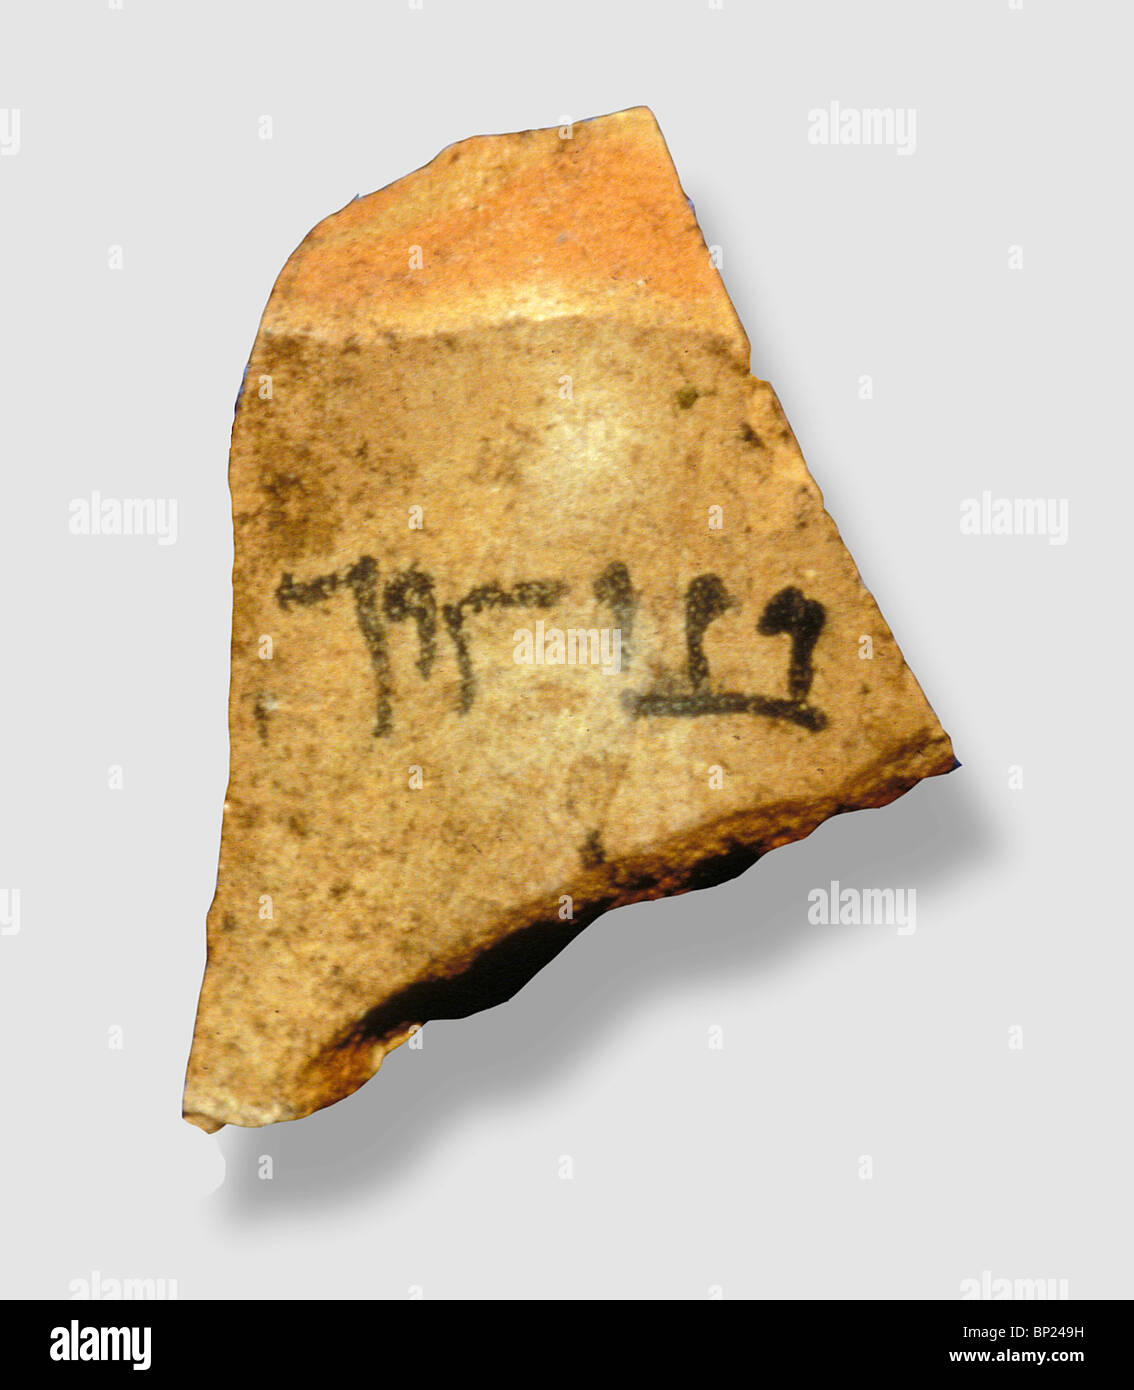 445. MASADA - OSTRACON INSCRIBED: 'BEN YAIR', WHICH WAS THE NAME OF ONE OF THE LEADERS OF THE REVOLT AGAINST THE ROMANS Stock Photo